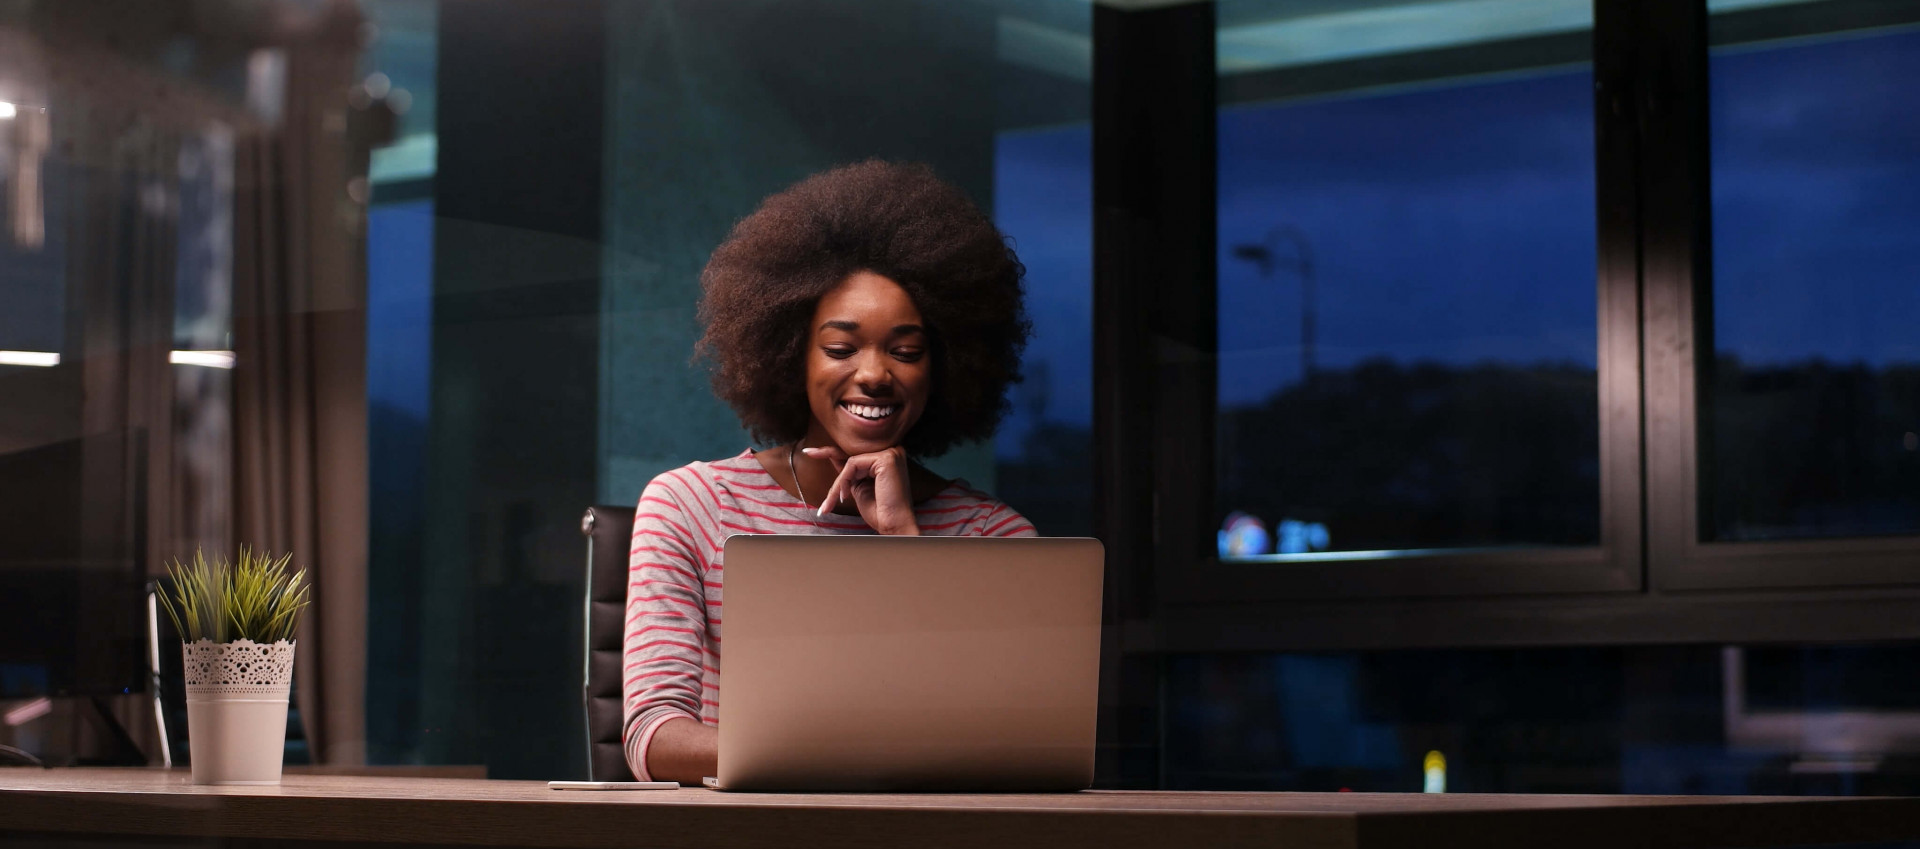 woman working in the evening smiling and sitting at a desk in an office with a laptop